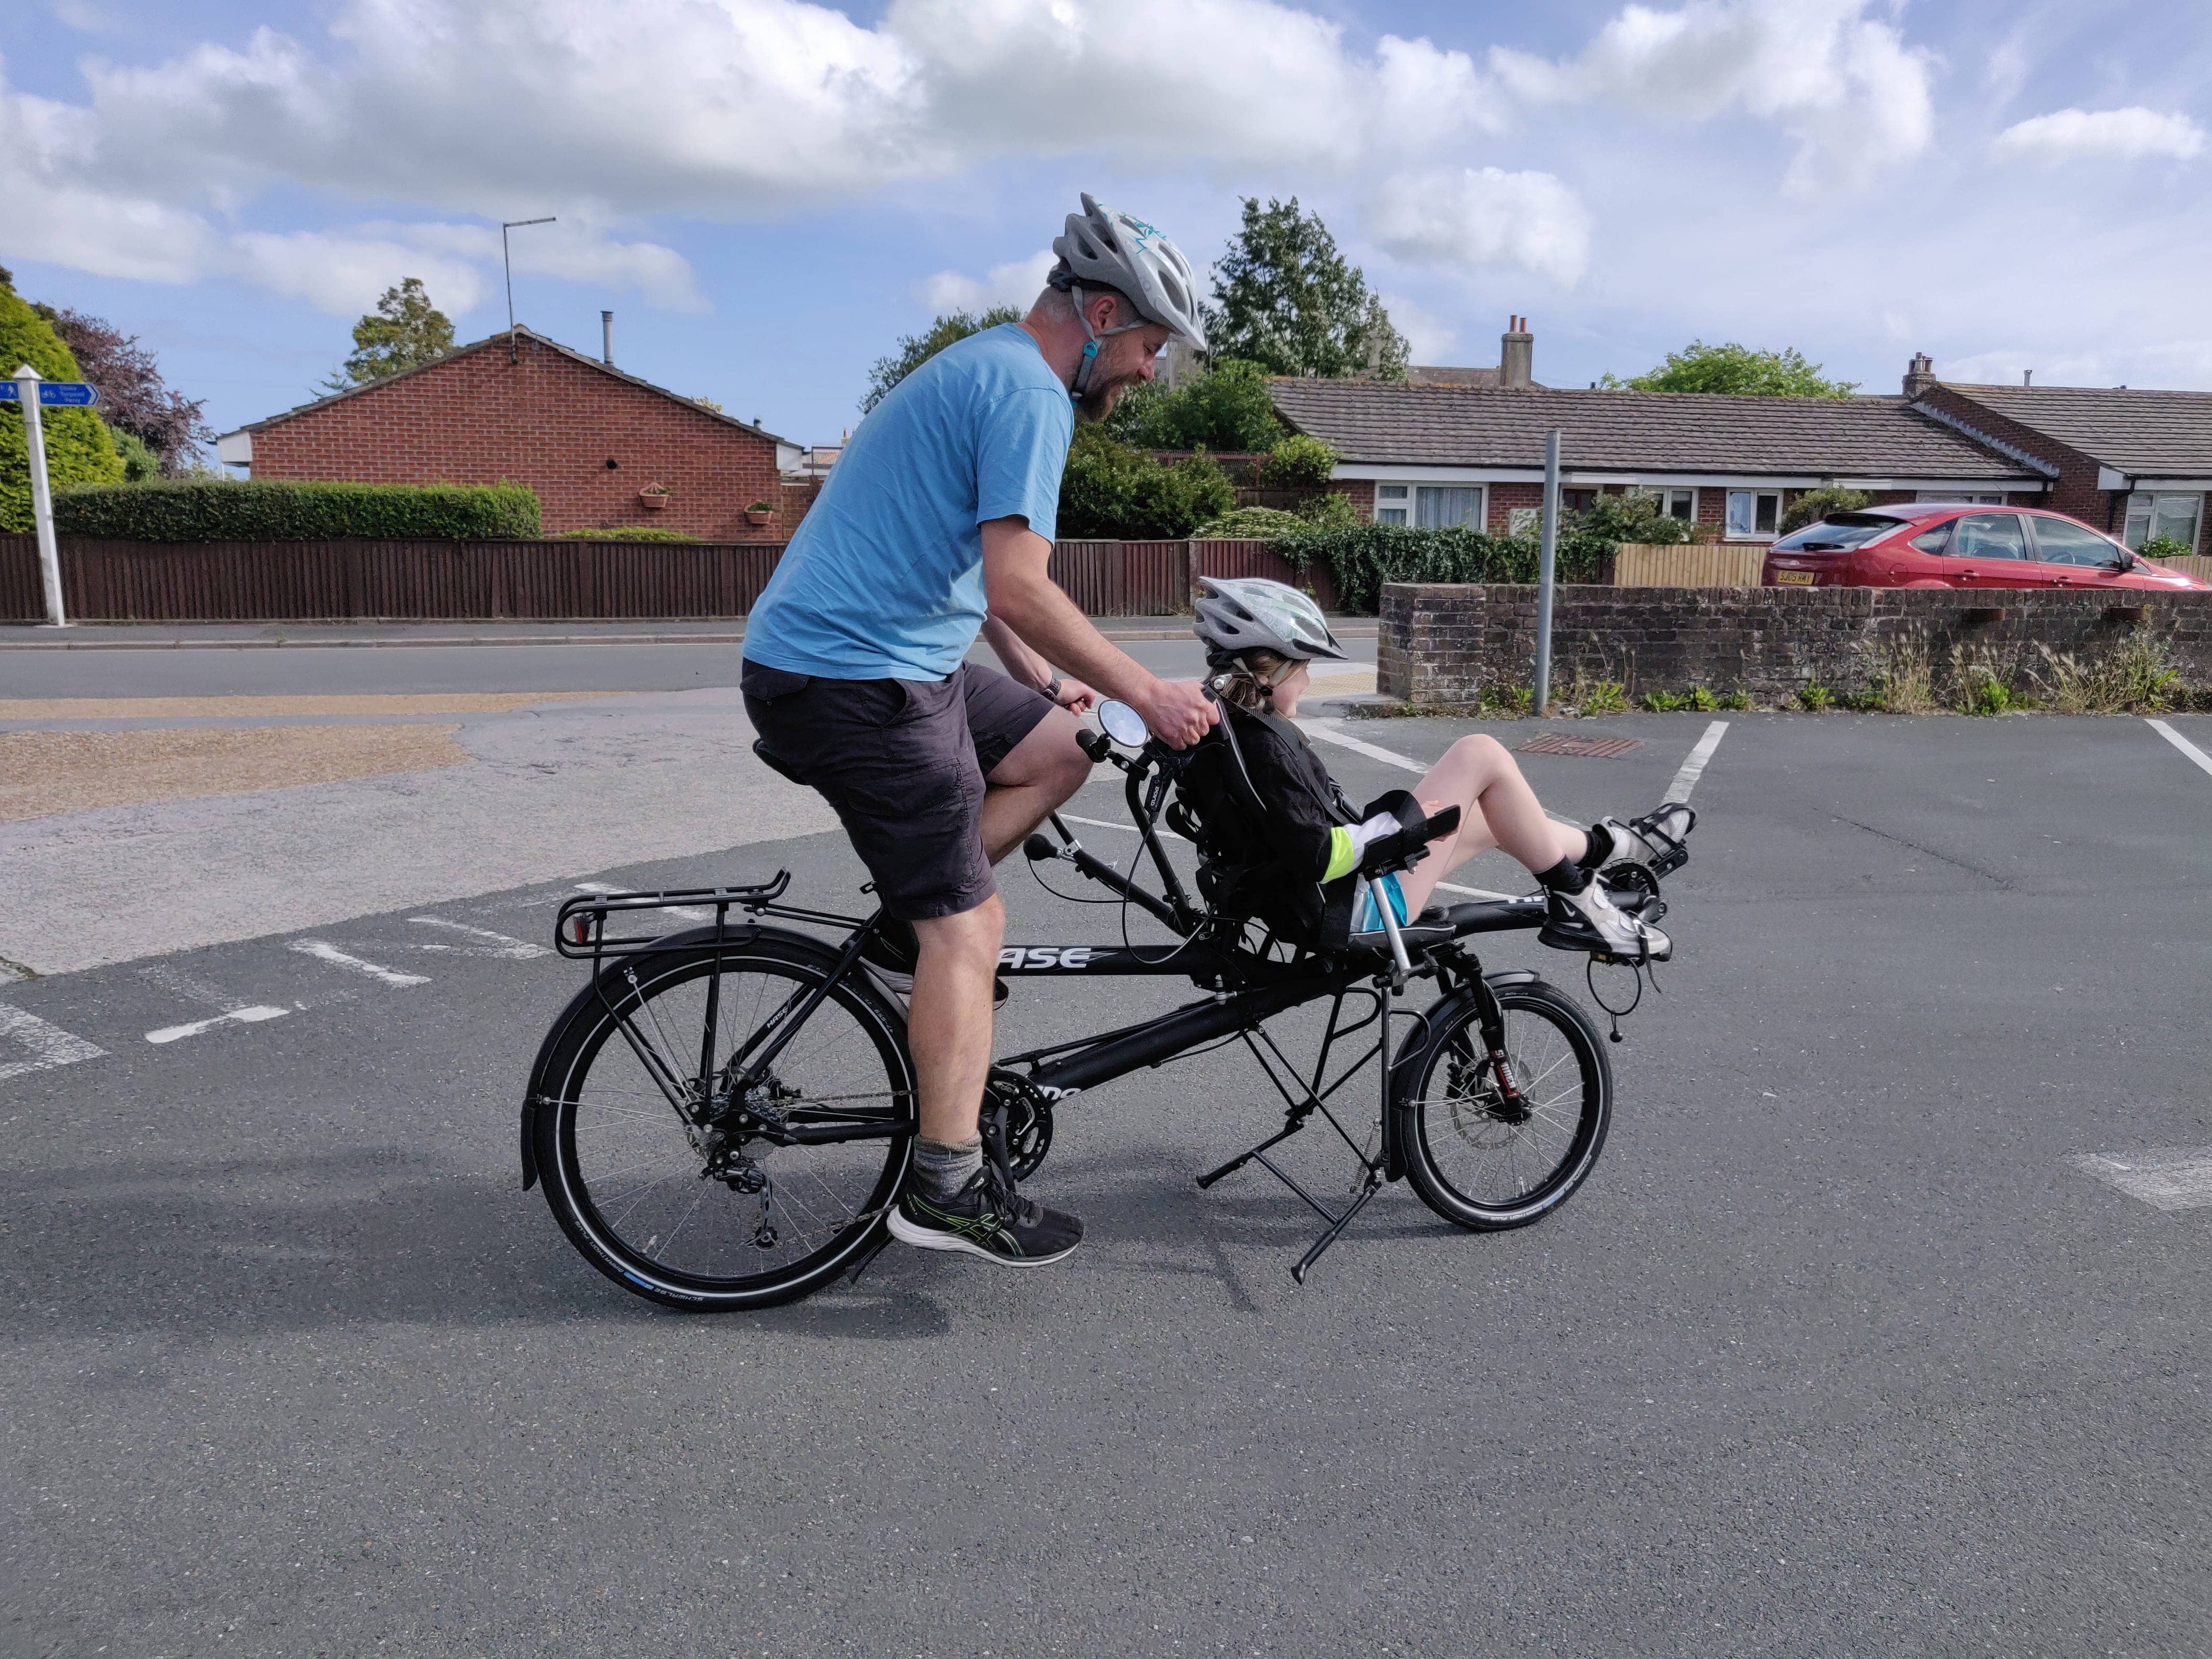 Me and my daughter on the recumbent tandem in a car park